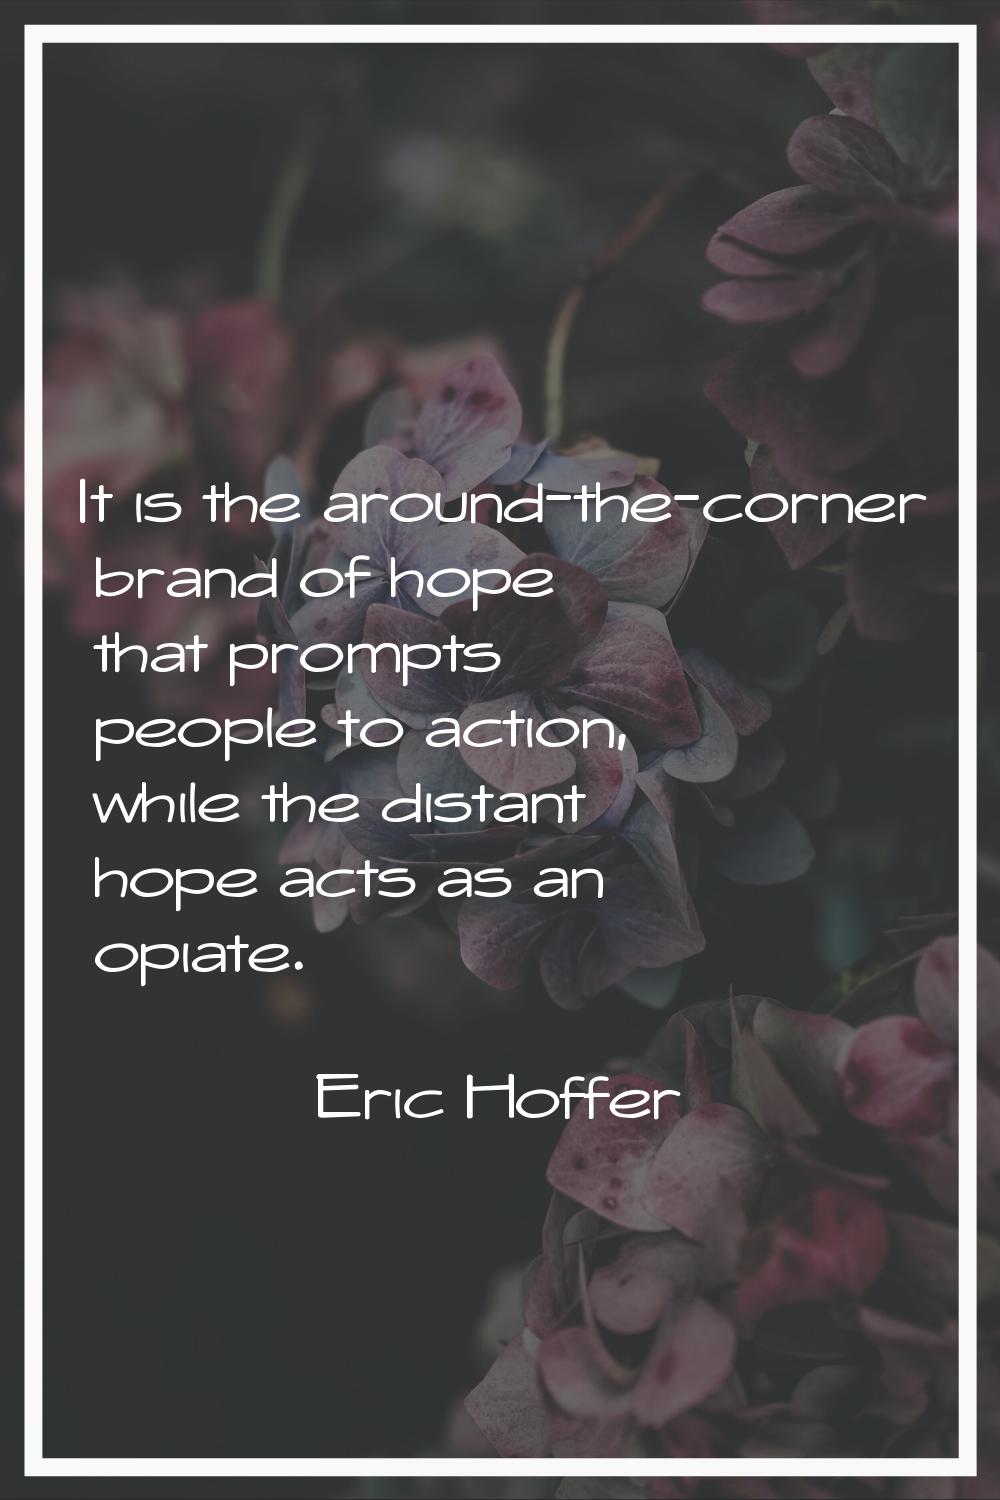 It is the around-the-corner brand of hope that prompts people to action, while the distant hope act